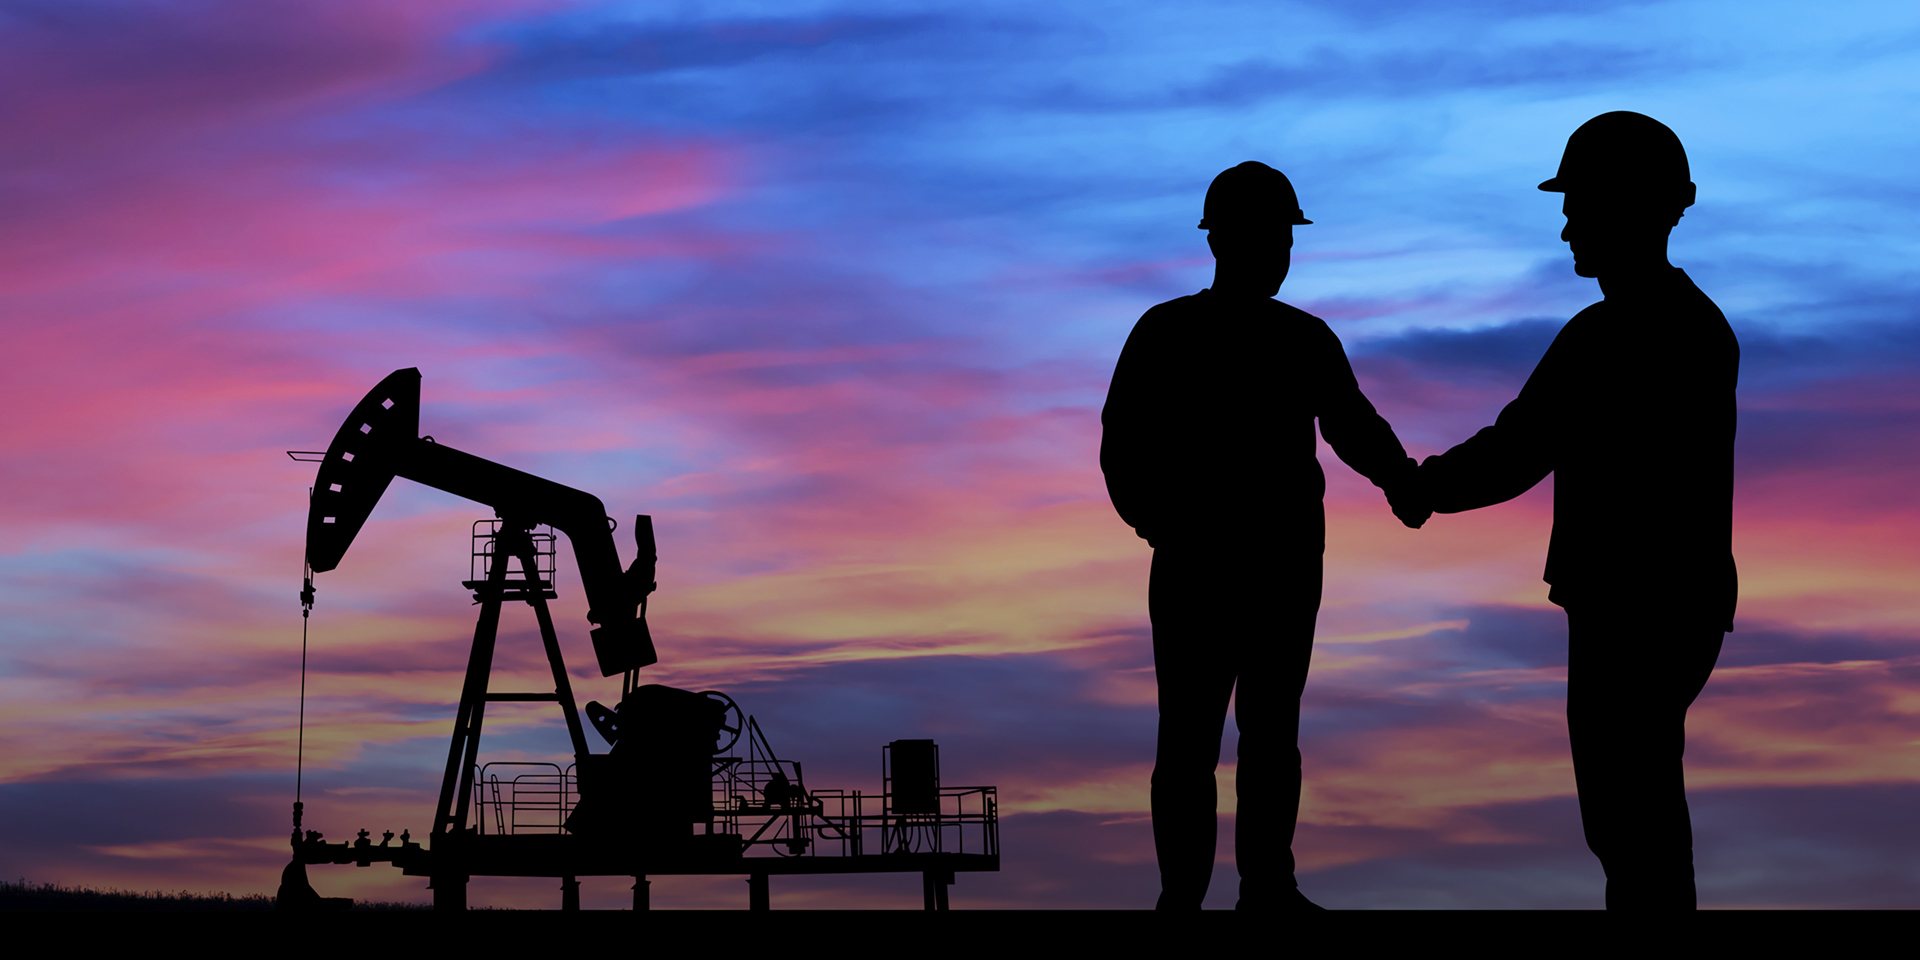 Two people shake hands in front of equipment at an oil field.